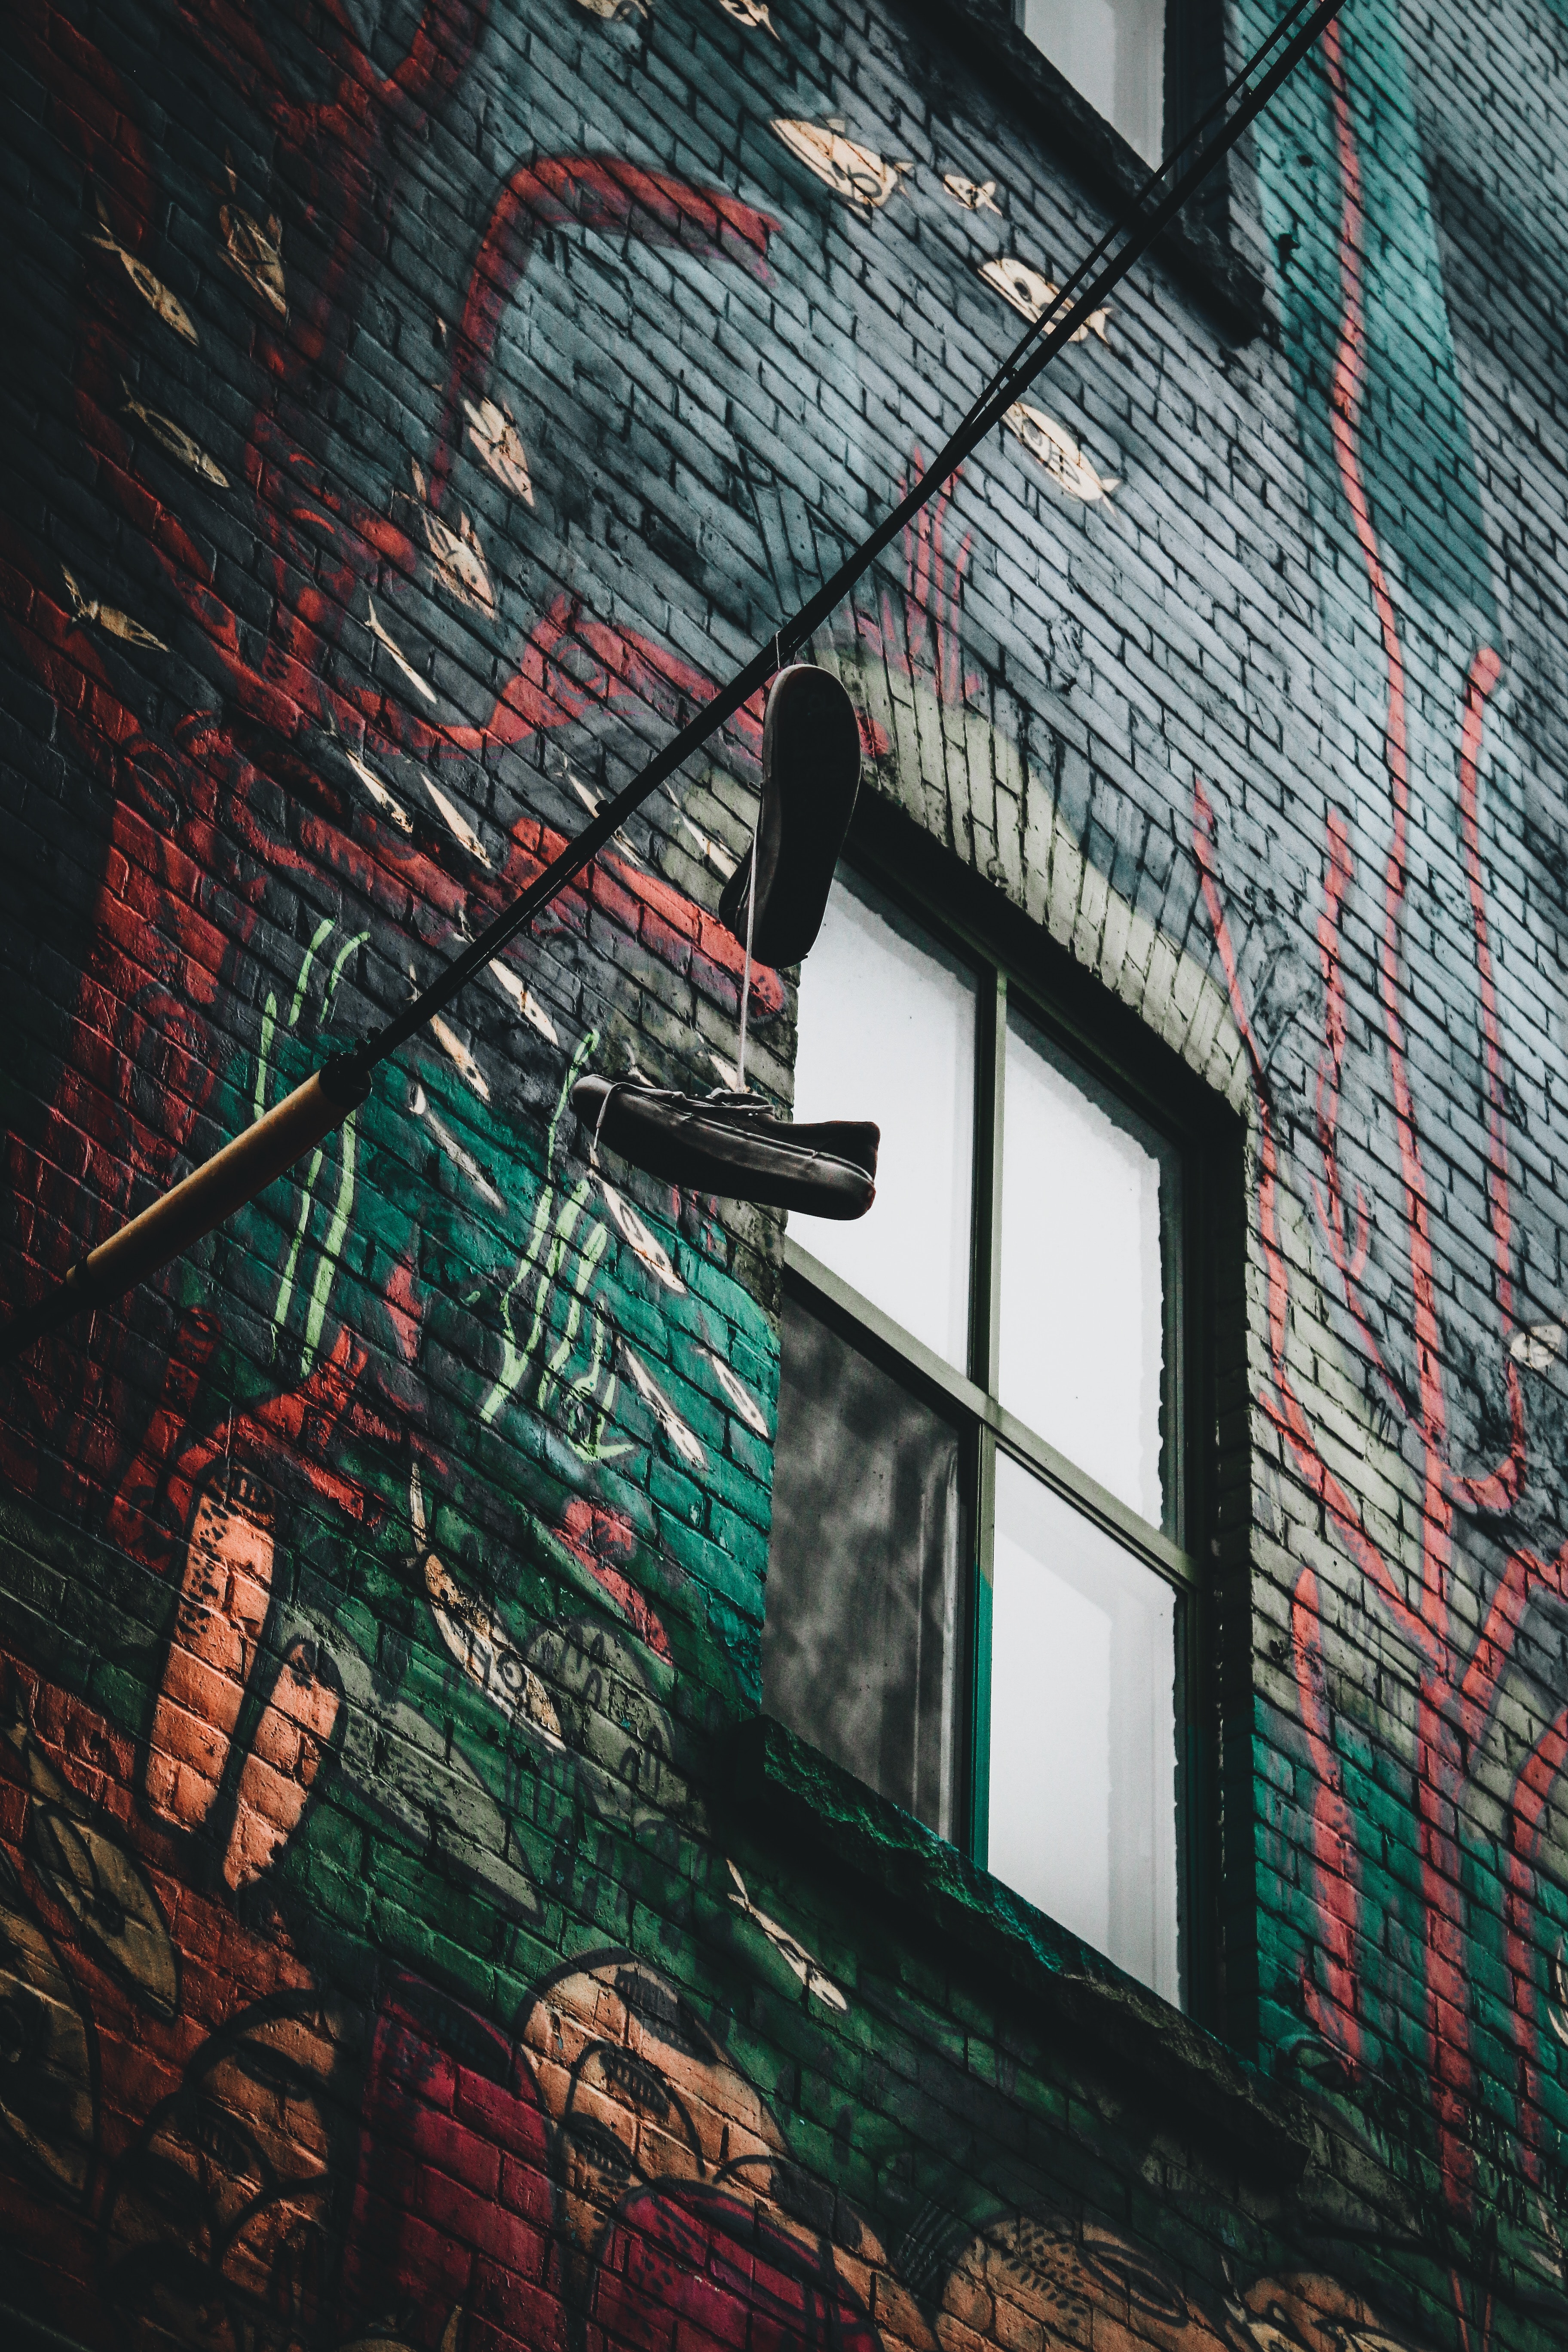 graffiti, shoes, miscellanea, wires, wire, wall, miscellaneous, sneakers, window cellphone